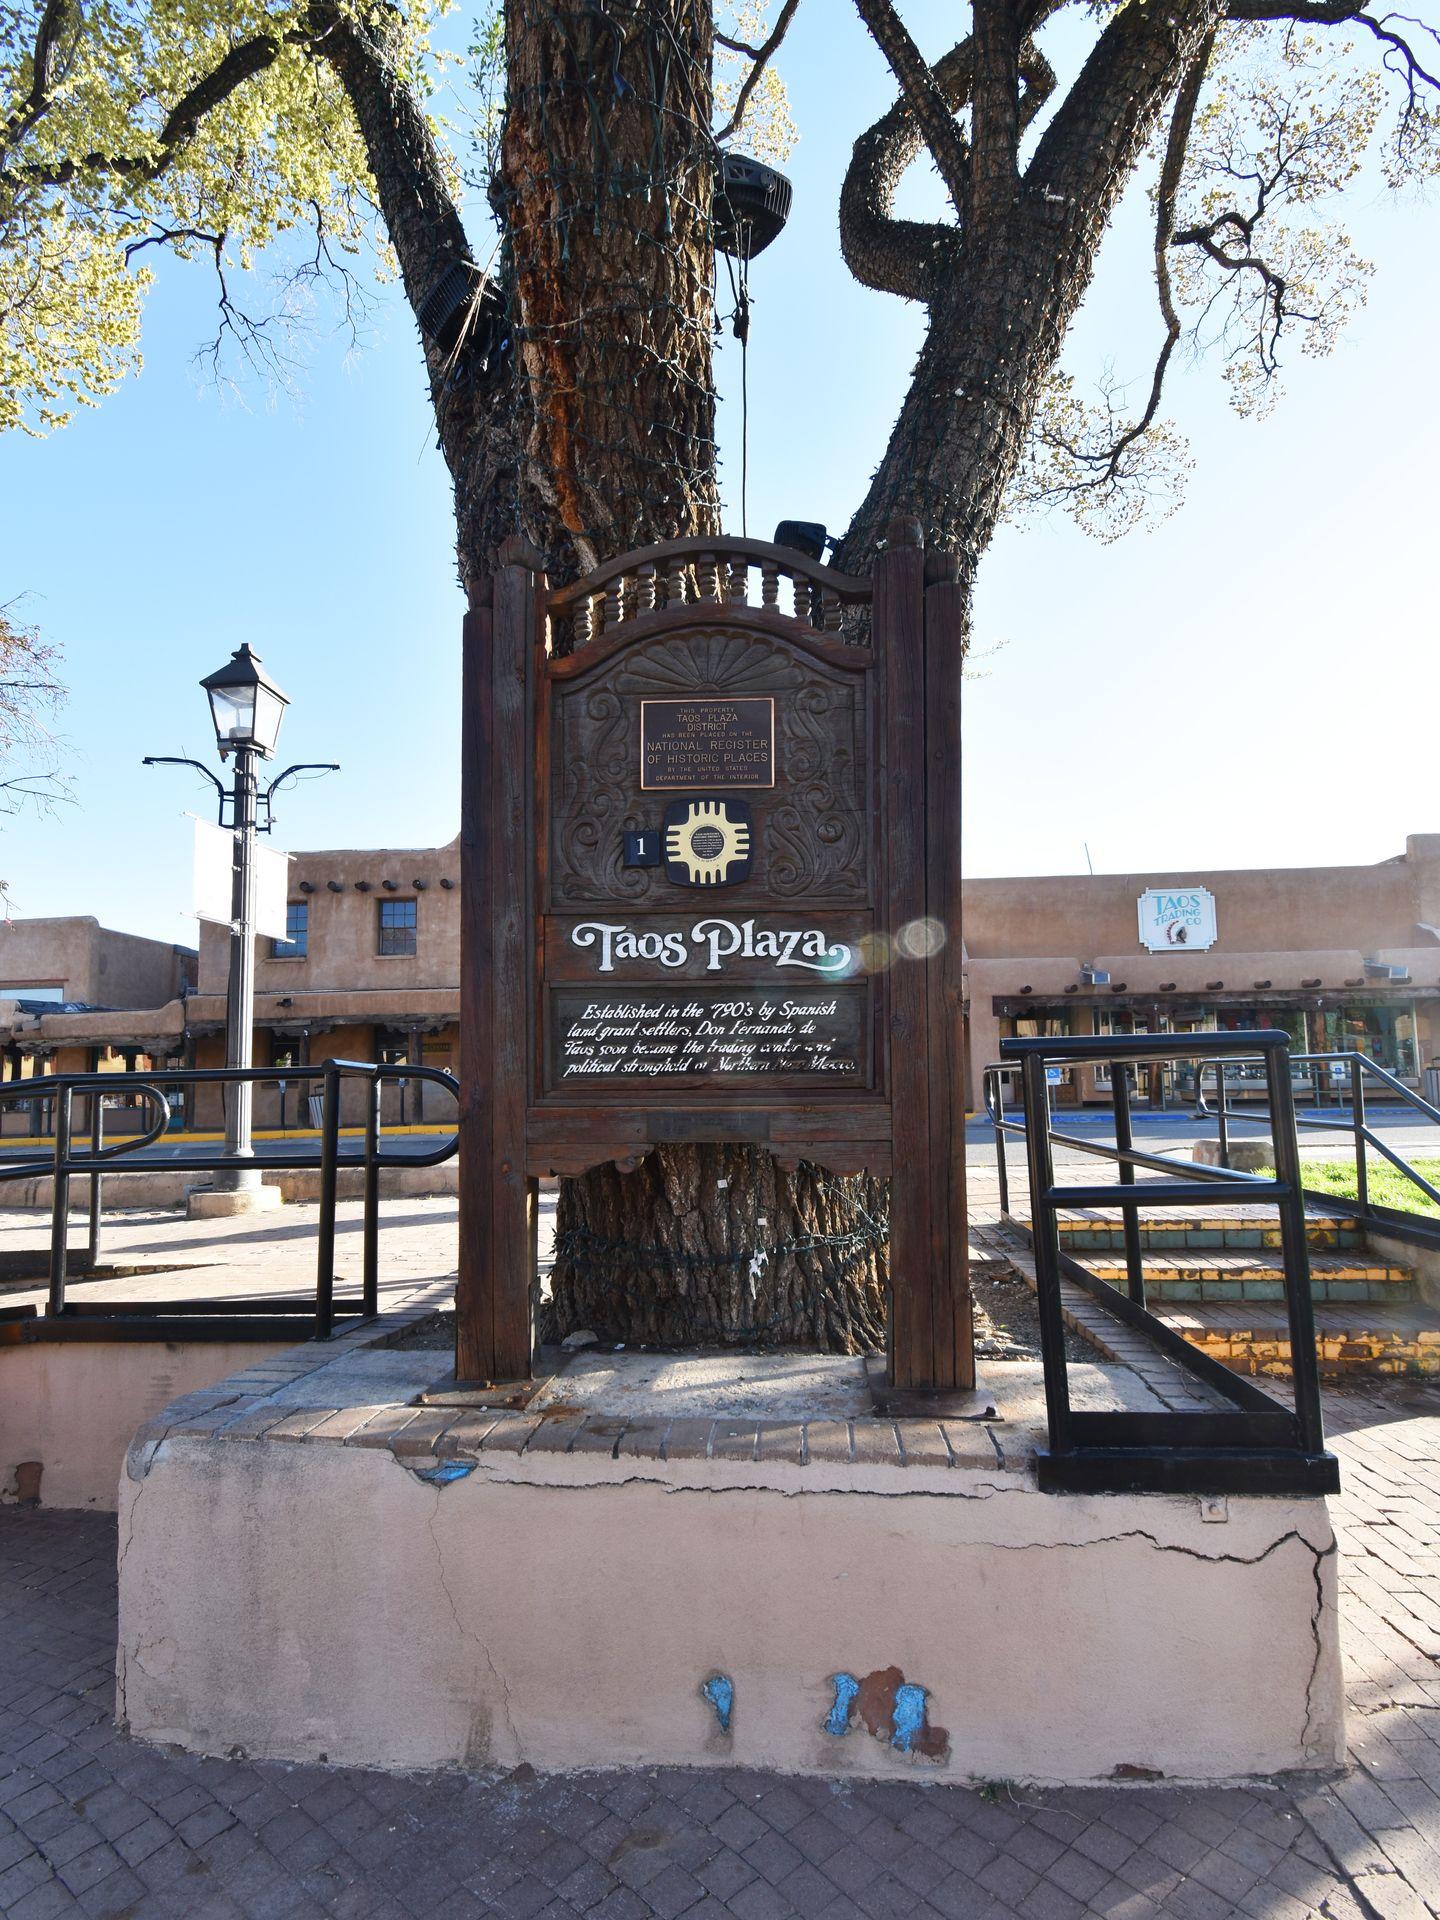 A large brown sign that says "Taos Plaza" with a brief history of the area.